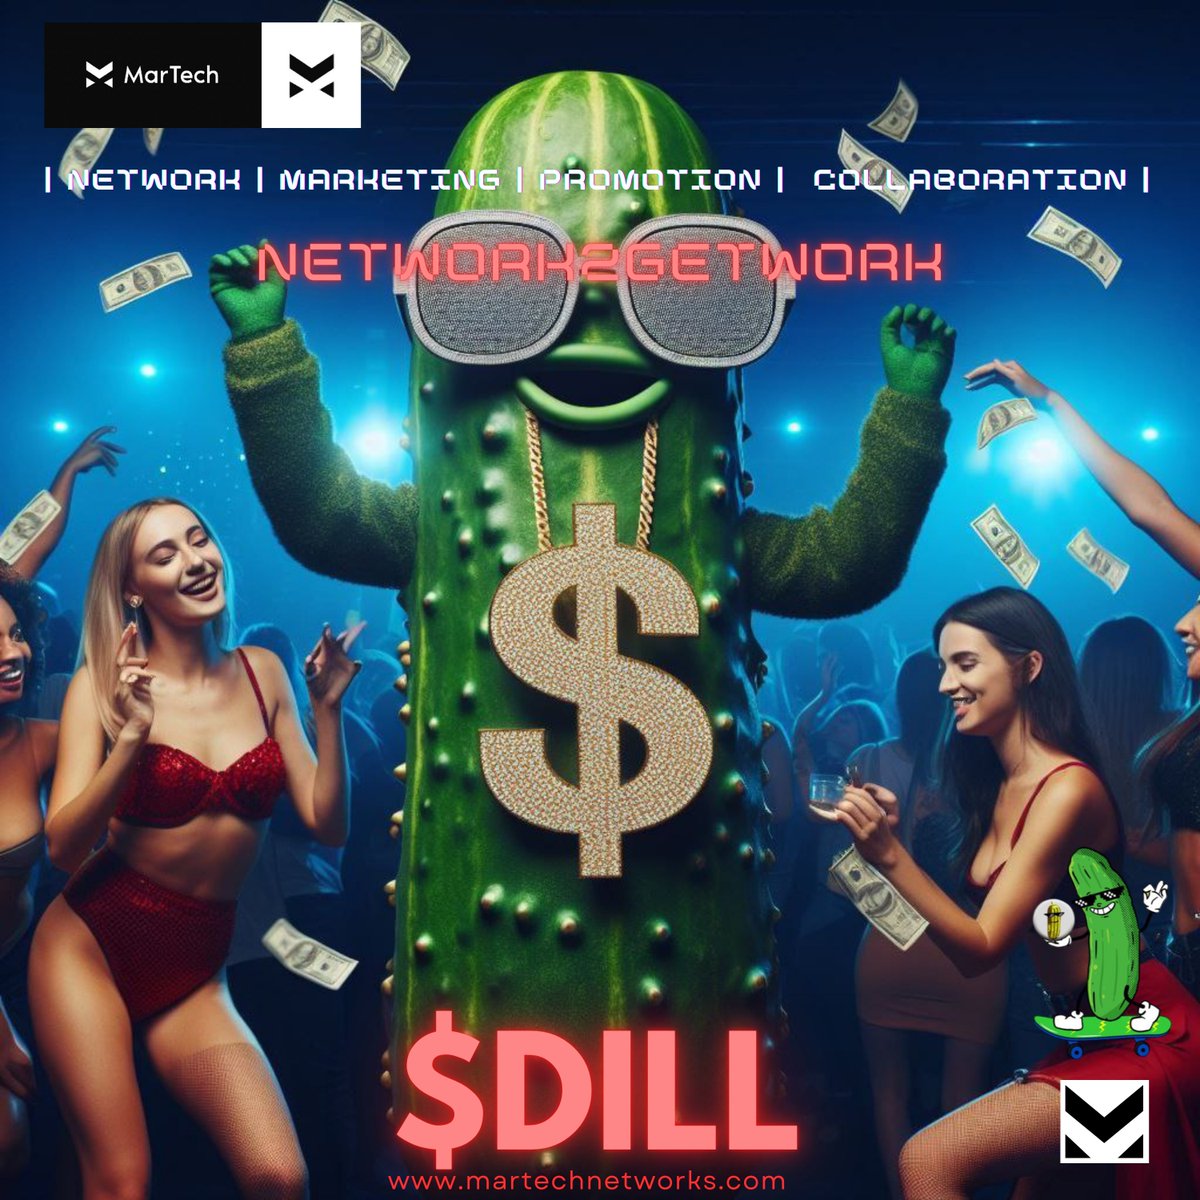 BiG shout out to @dillwifit_com Just Burned 20.4m $DILL 👀LFG🦾

The Ticker is $Dill | #Sol

New Alpha DroP Inbound🔥

Check out $DILL / SOL on DEX Screener!
dexscreener.com/solana/dcfvbc2…
#solana #memecoin #memecoins